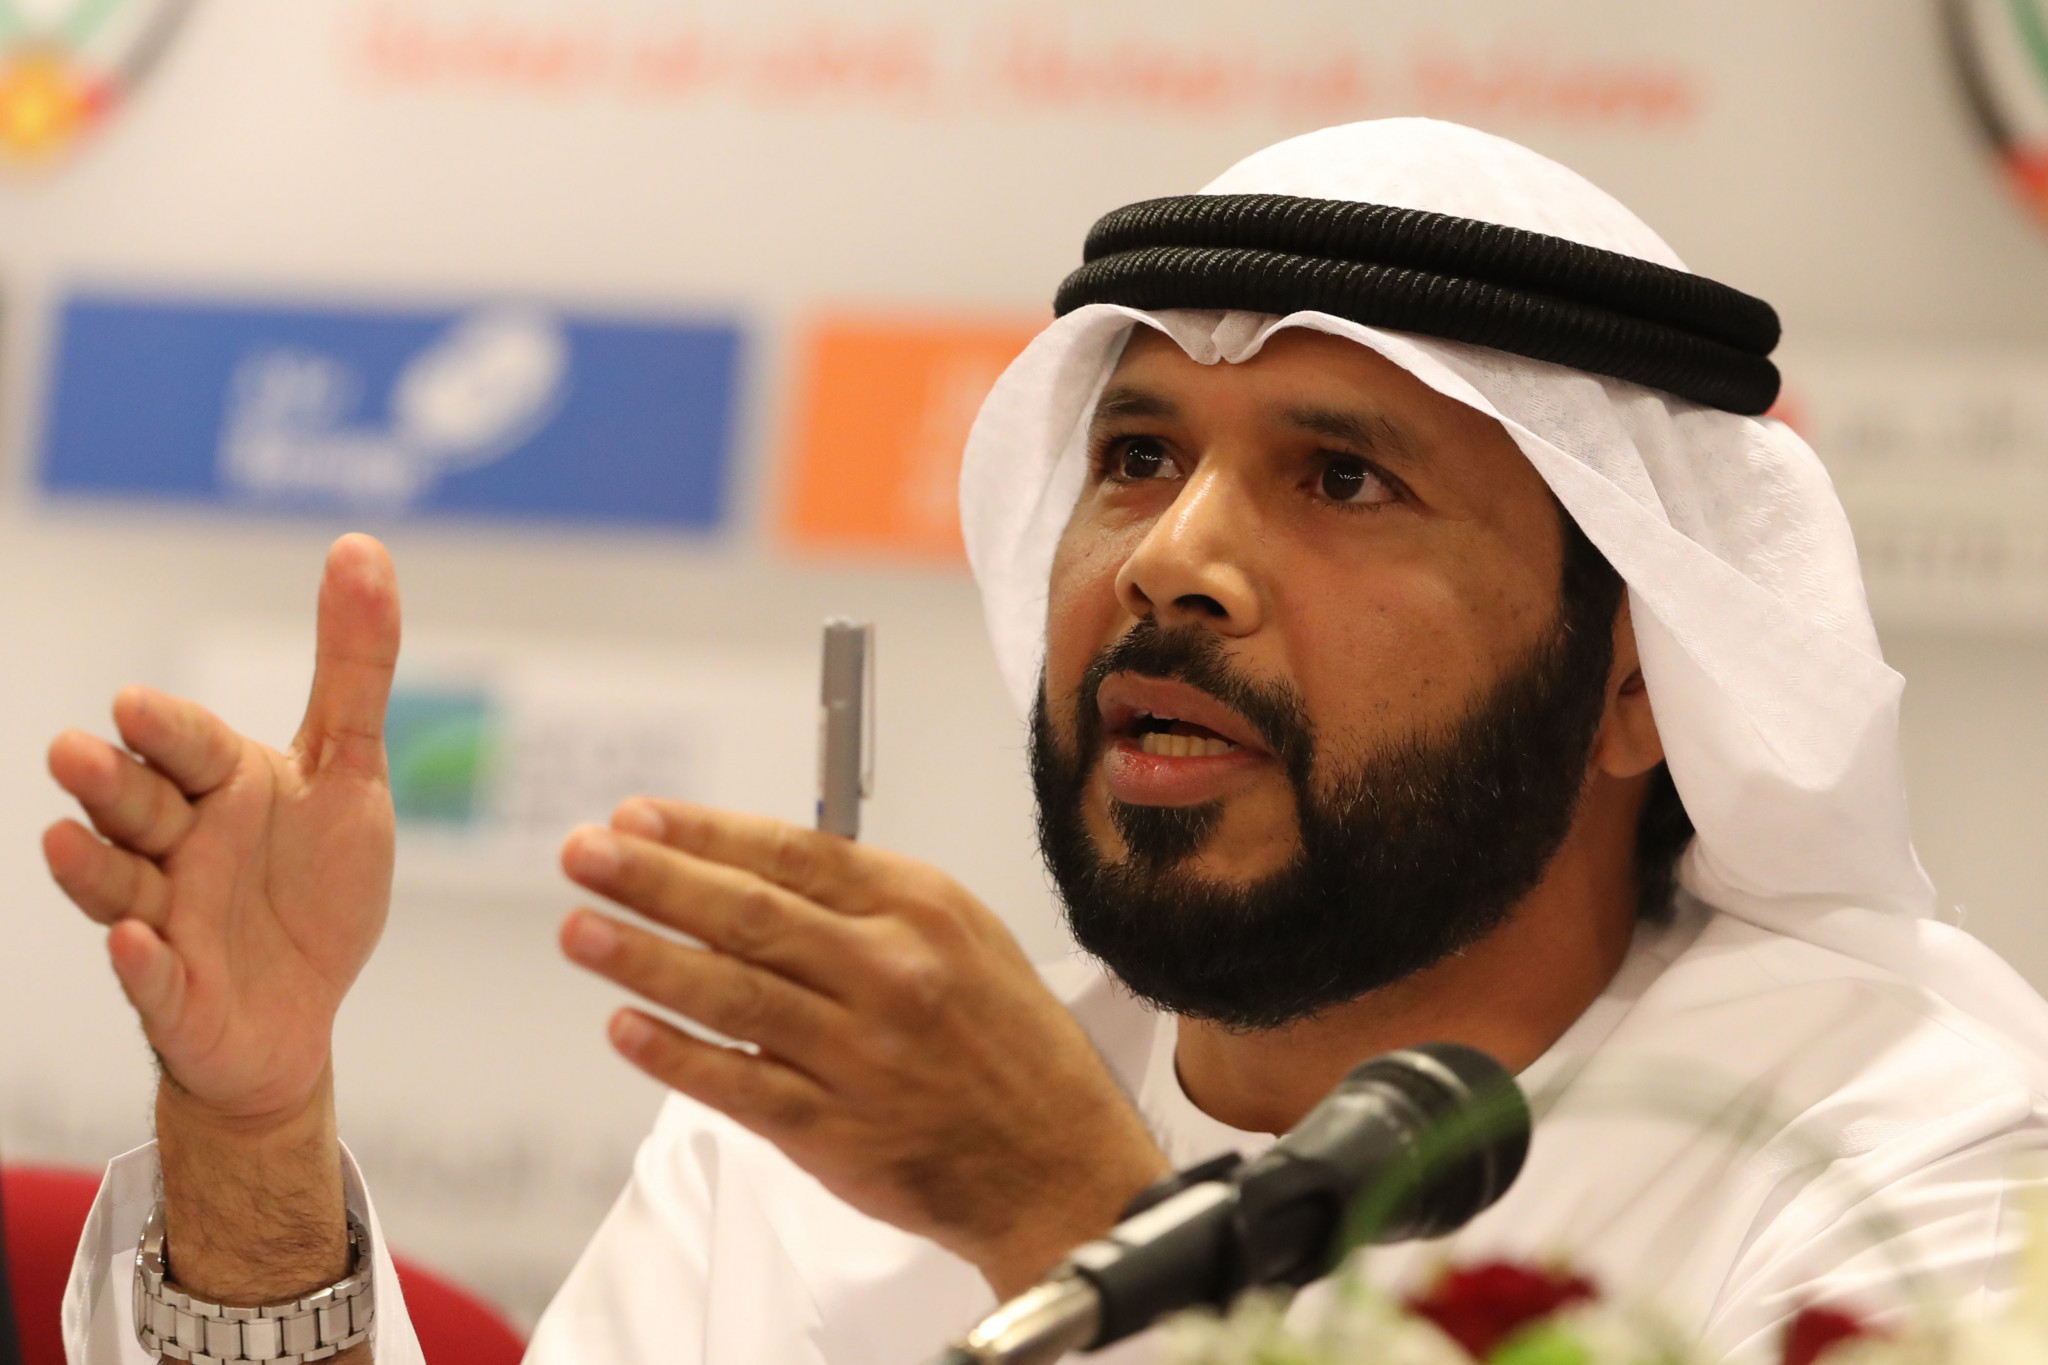 UAE official claims boycott of Gulf Cup of Nations not down to political crisis in region